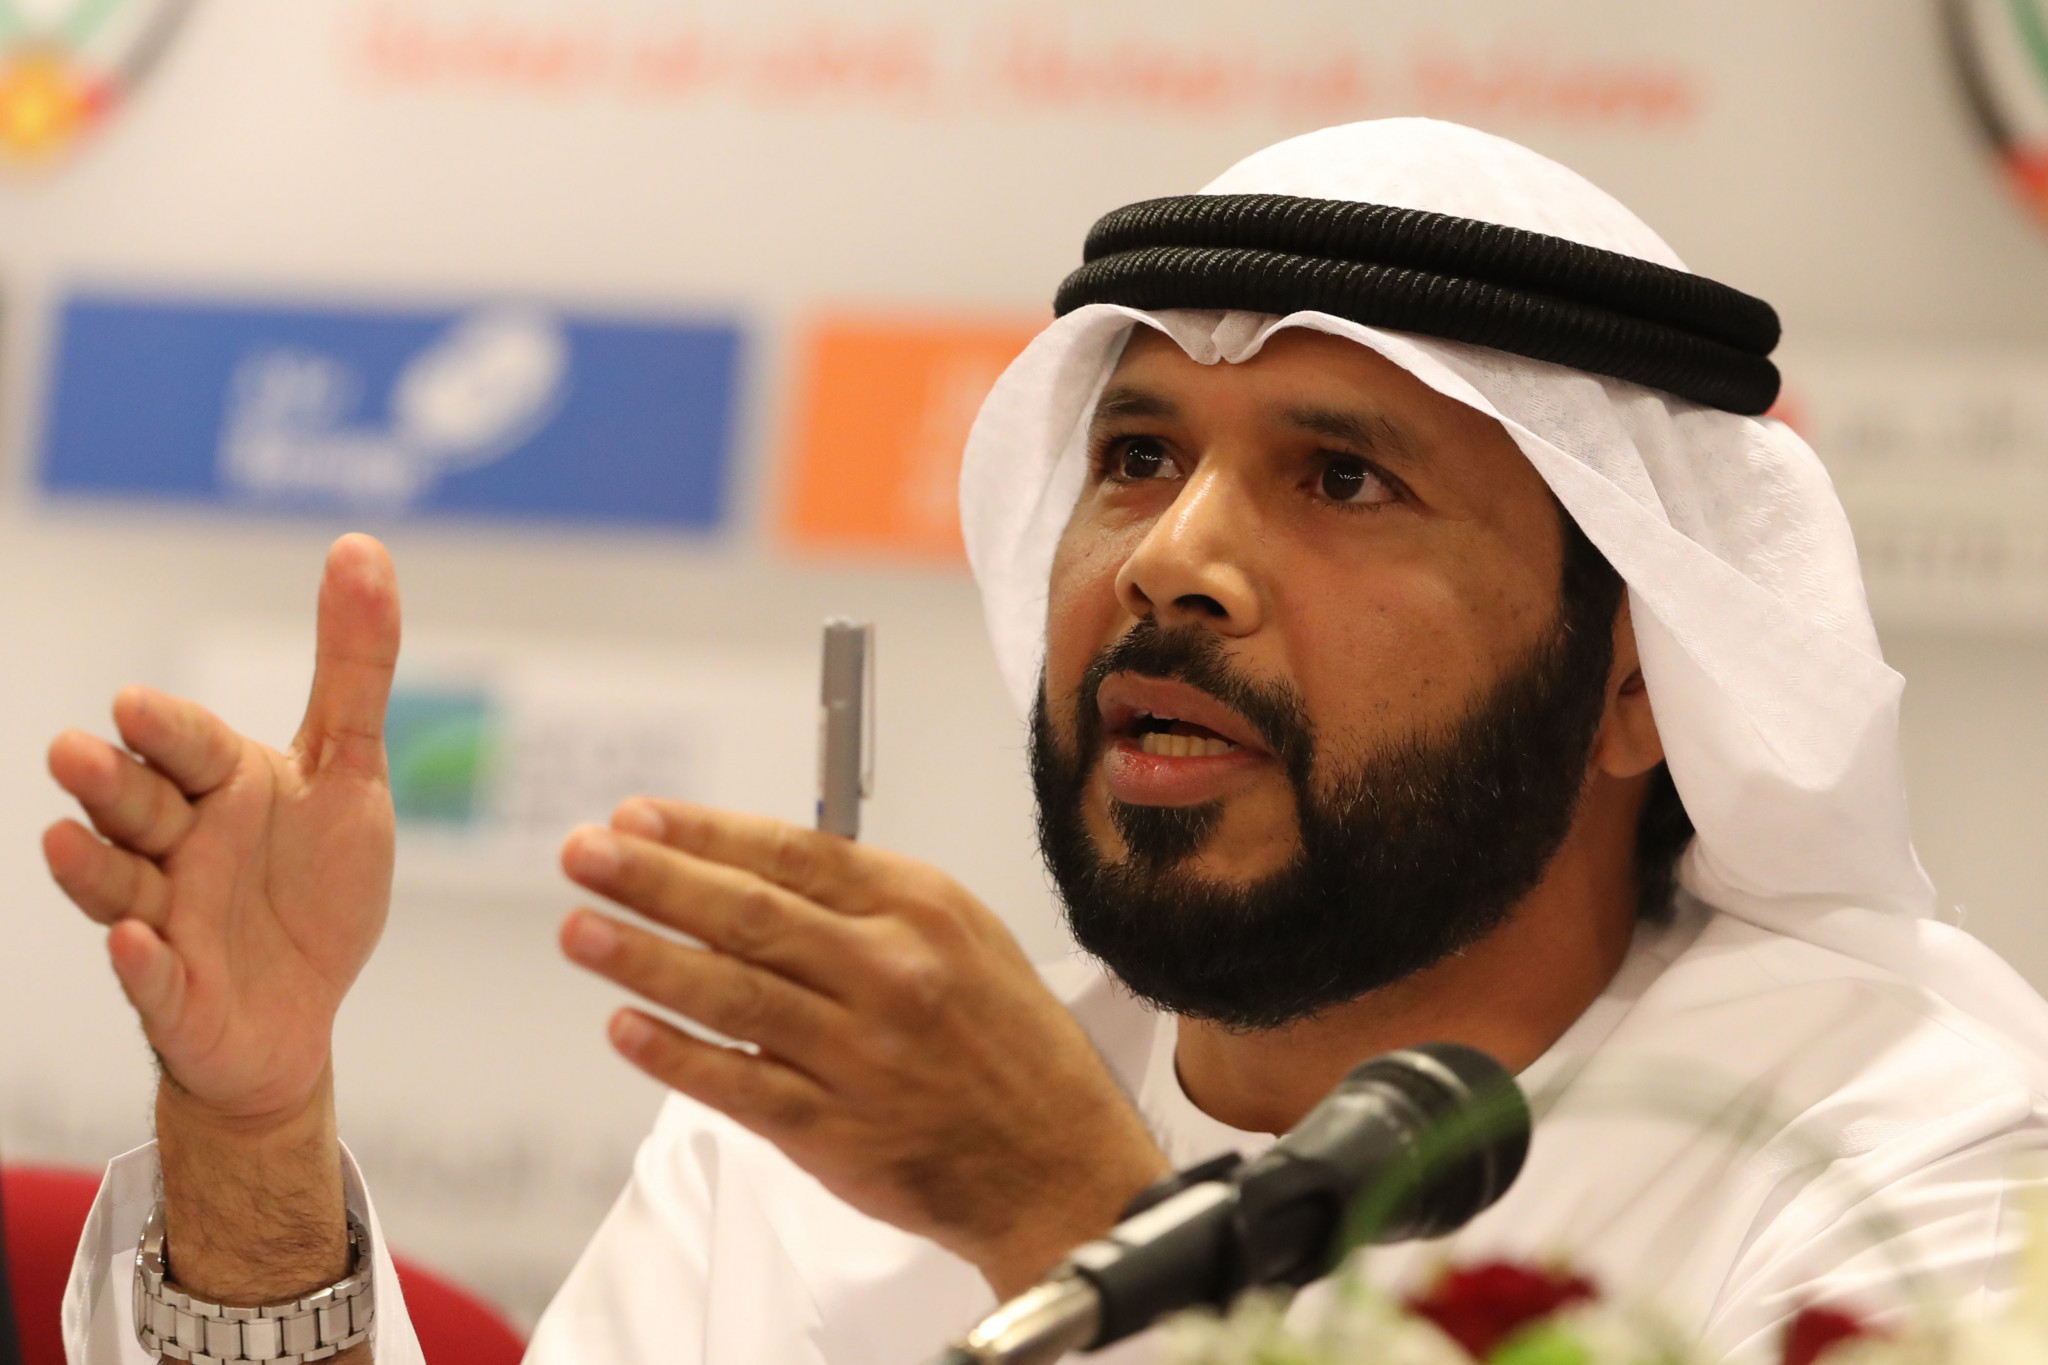 UAE official claims boycott of Gulf Cup of Nations not down to political crisis in region